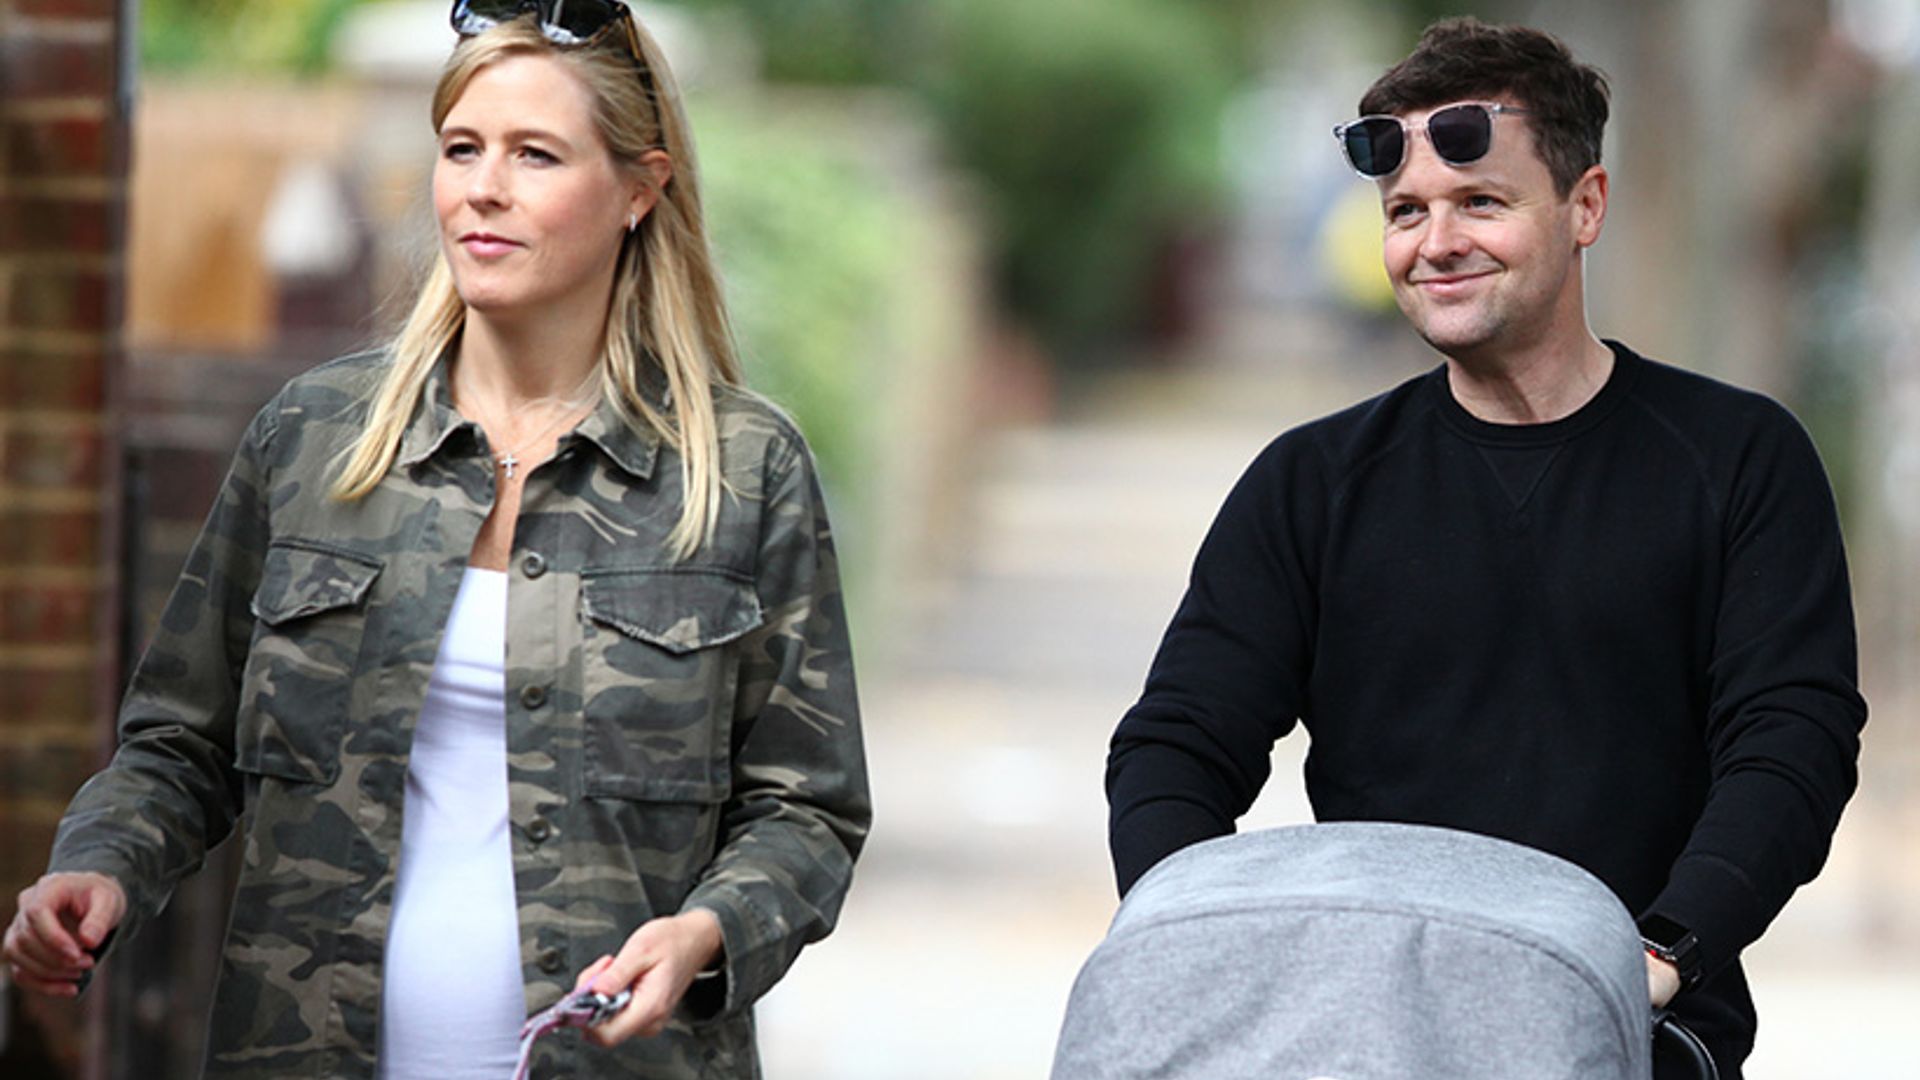 Declan Donnelly and Ali Astall take baby daughter for first stroll - see the adorable pictures